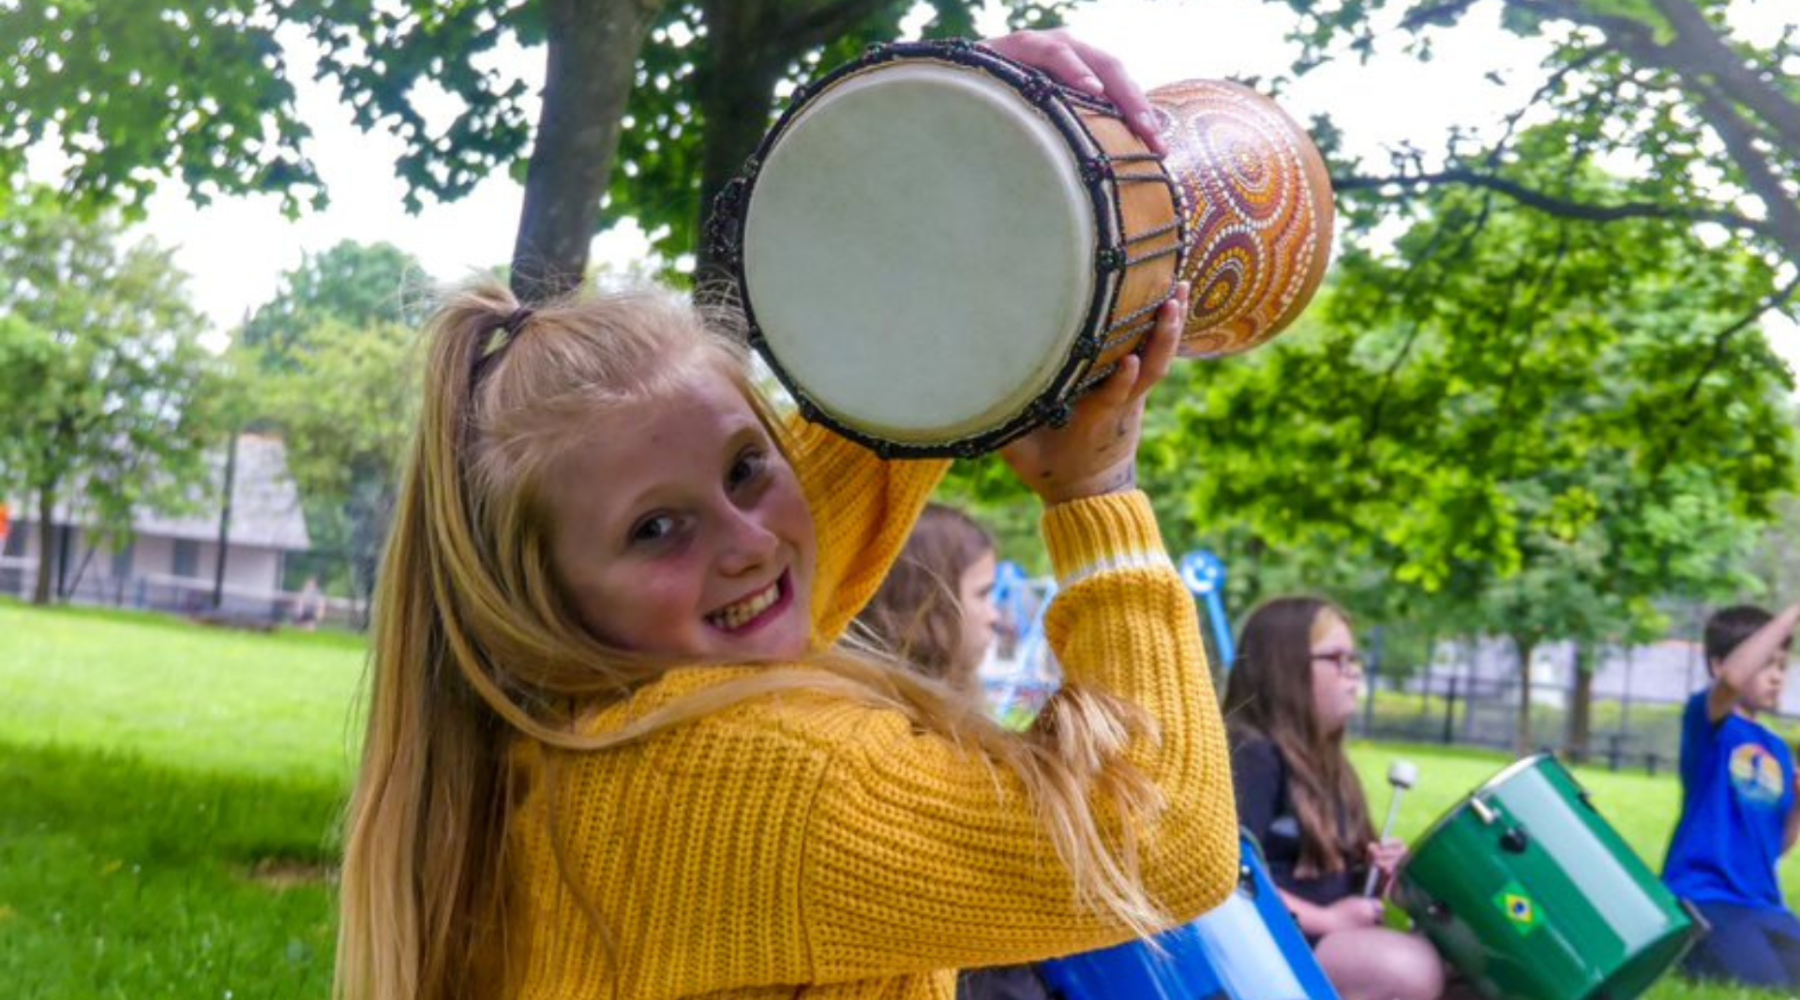 Omaze Million Pound House Kent Draw - Global's Make Some Noise Charity Girl in a yellow jumper holding a drum in the air 